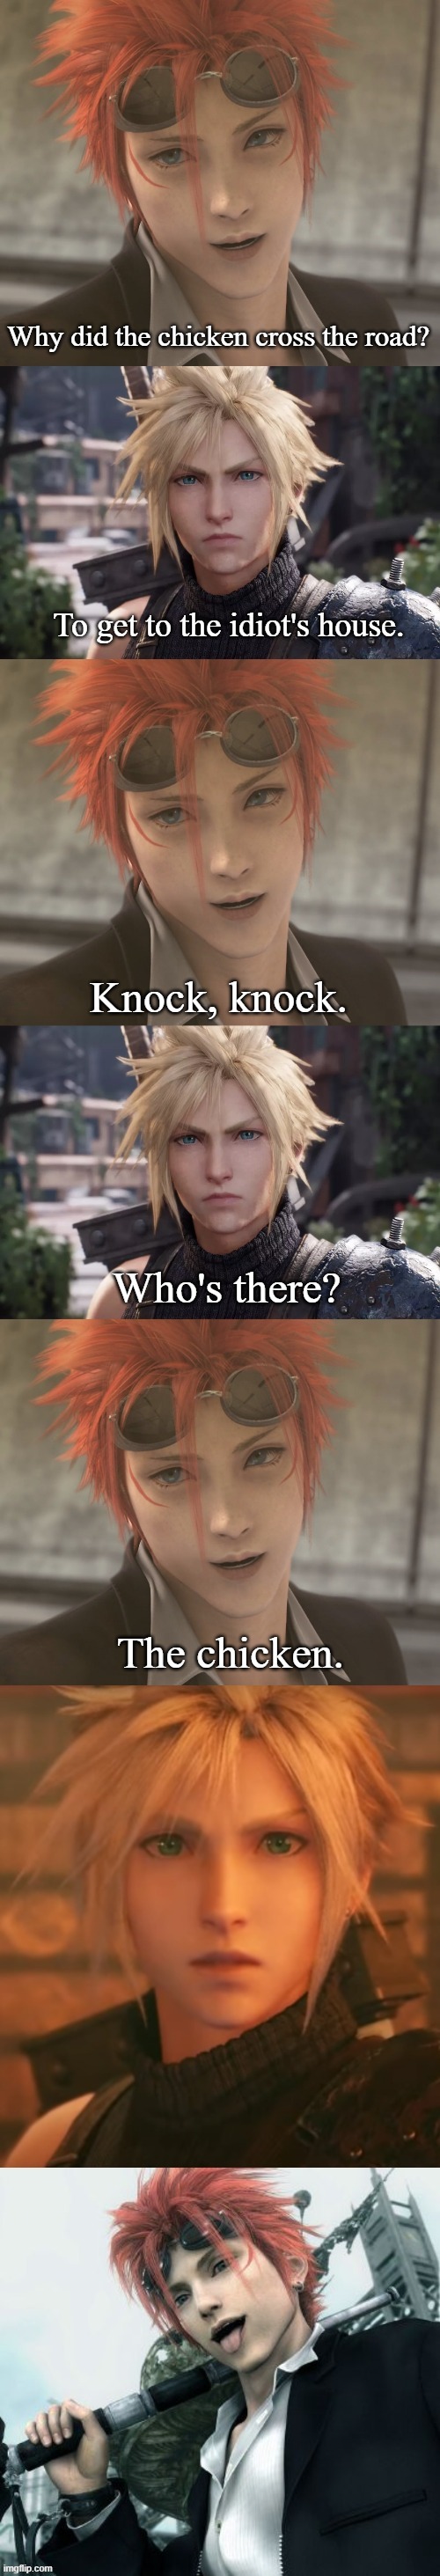 Reno Makes Cloud the Victim of a Joke | image tagged in memes,funny,reno,cloud strife from final fantasy vii remake | made w/ Imgflip meme maker